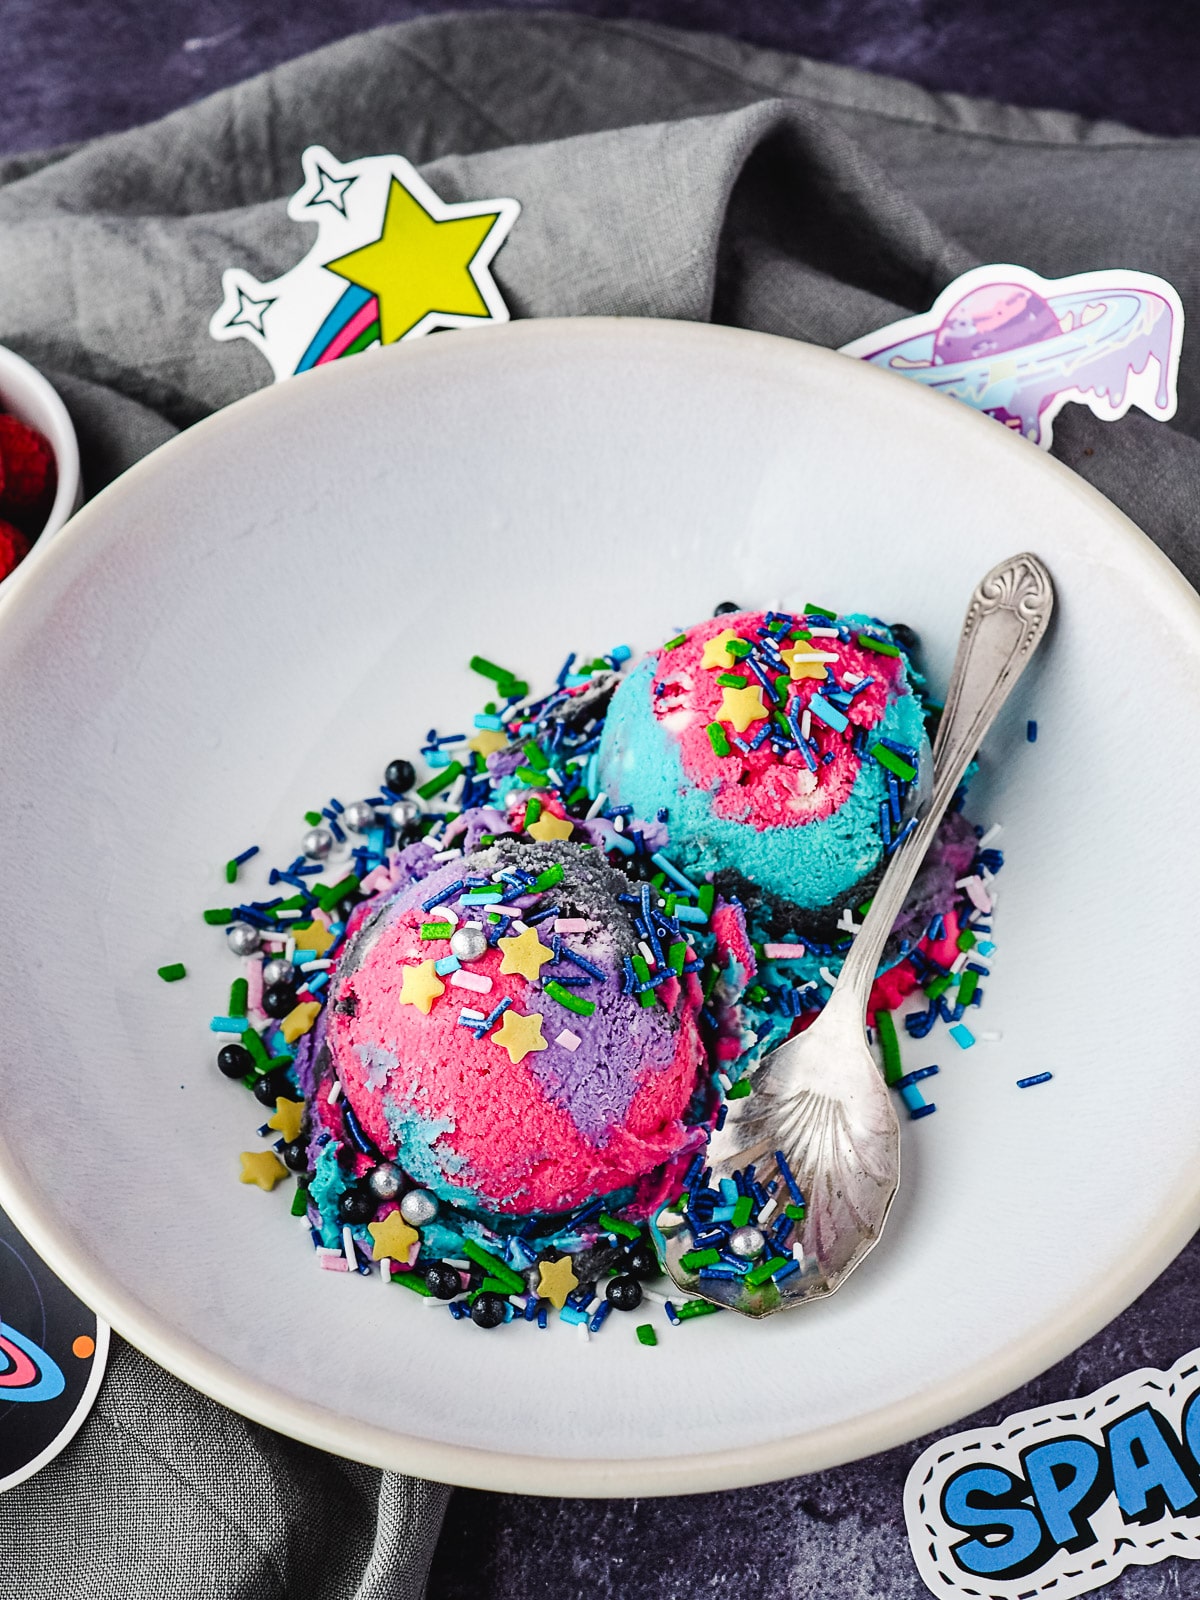 Two scoops of ice cream with space sprinkles in a bowl with a spoon, surrounded by space stickers.